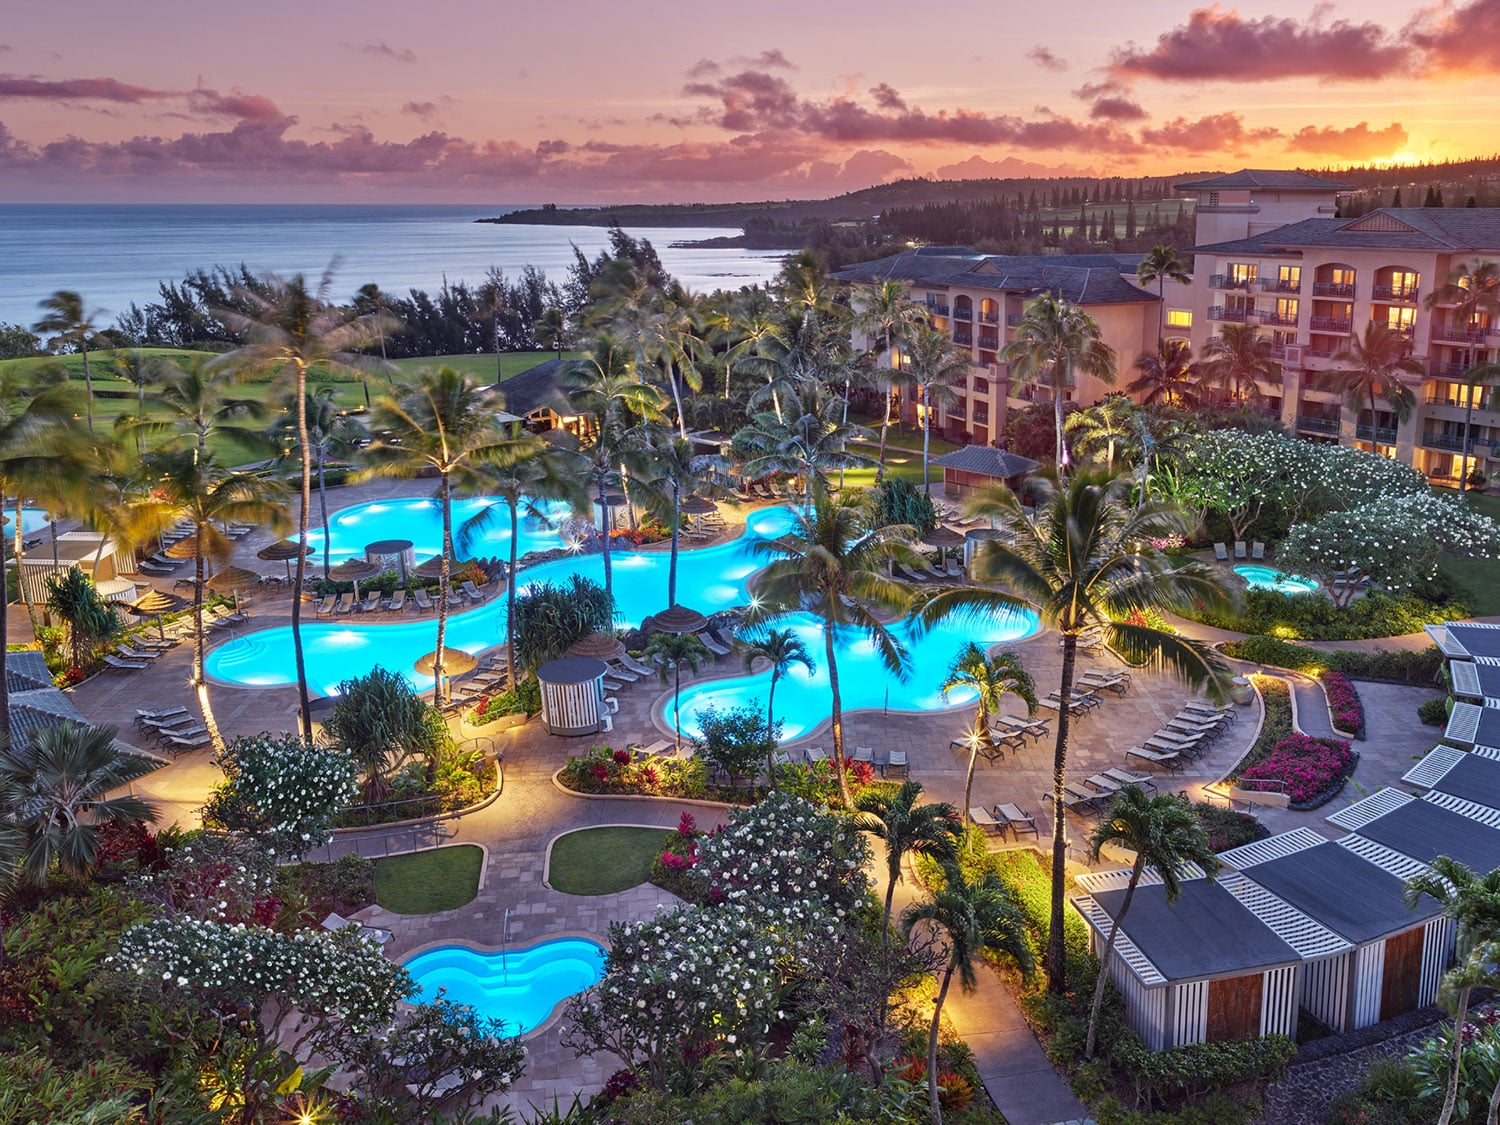 An aerial evening view of the main pool at The Ritz-Carlton Maui, Kapalua, in Hawaii.